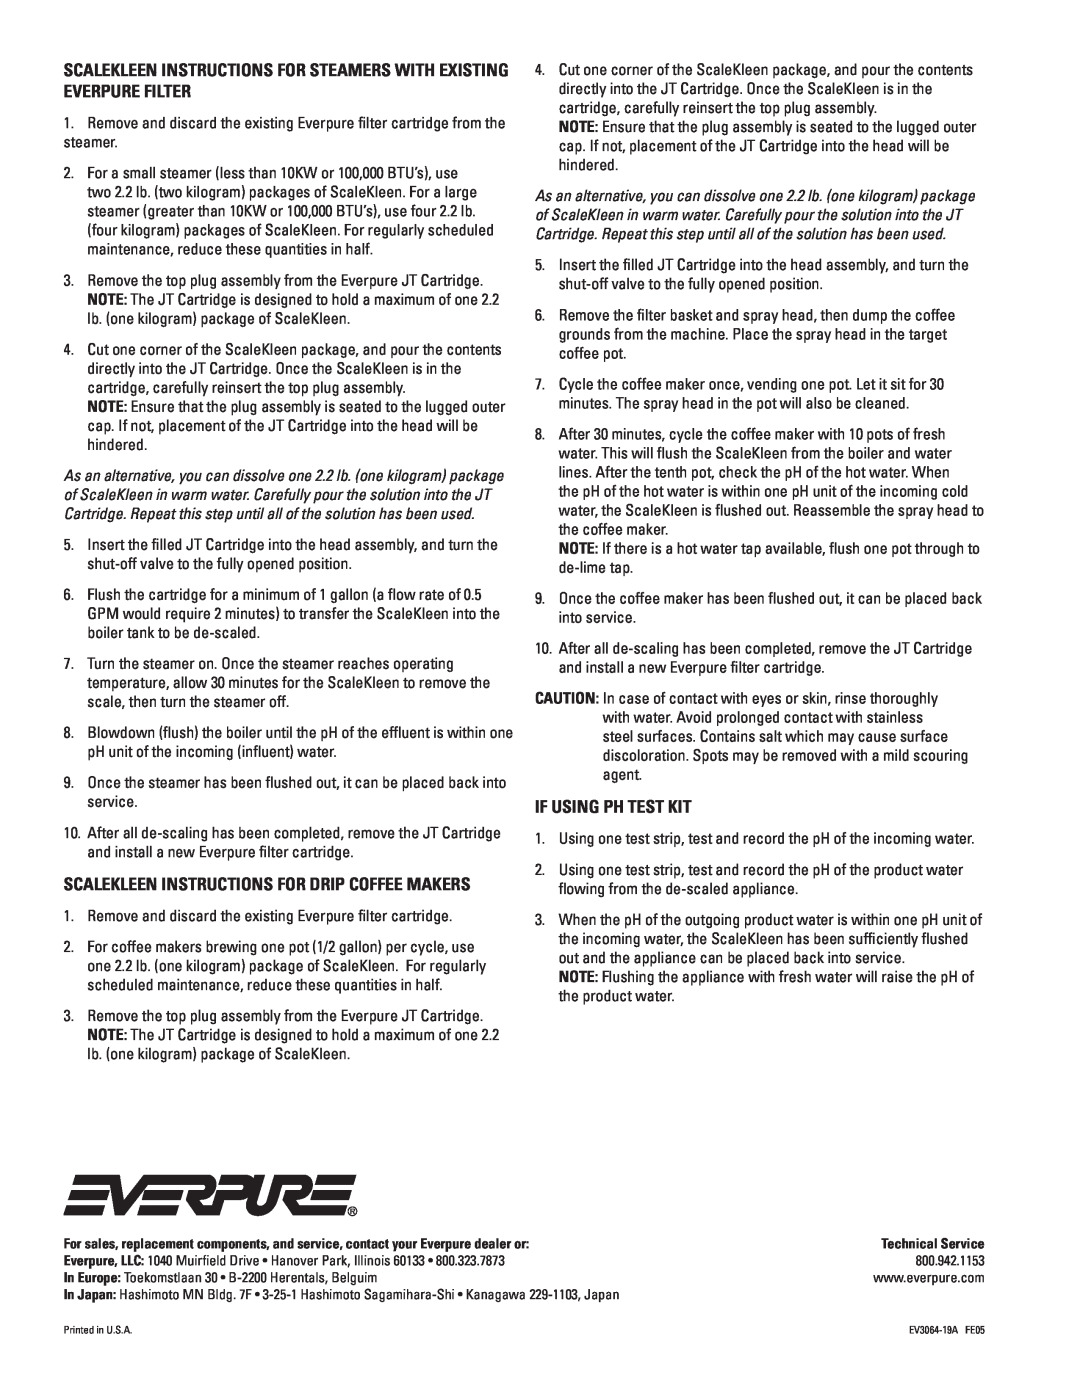 Everpure EV9655-00 Scalekleen Instructions For Steamers With Existing Everpure Filter, If Using Ph Test Kit 